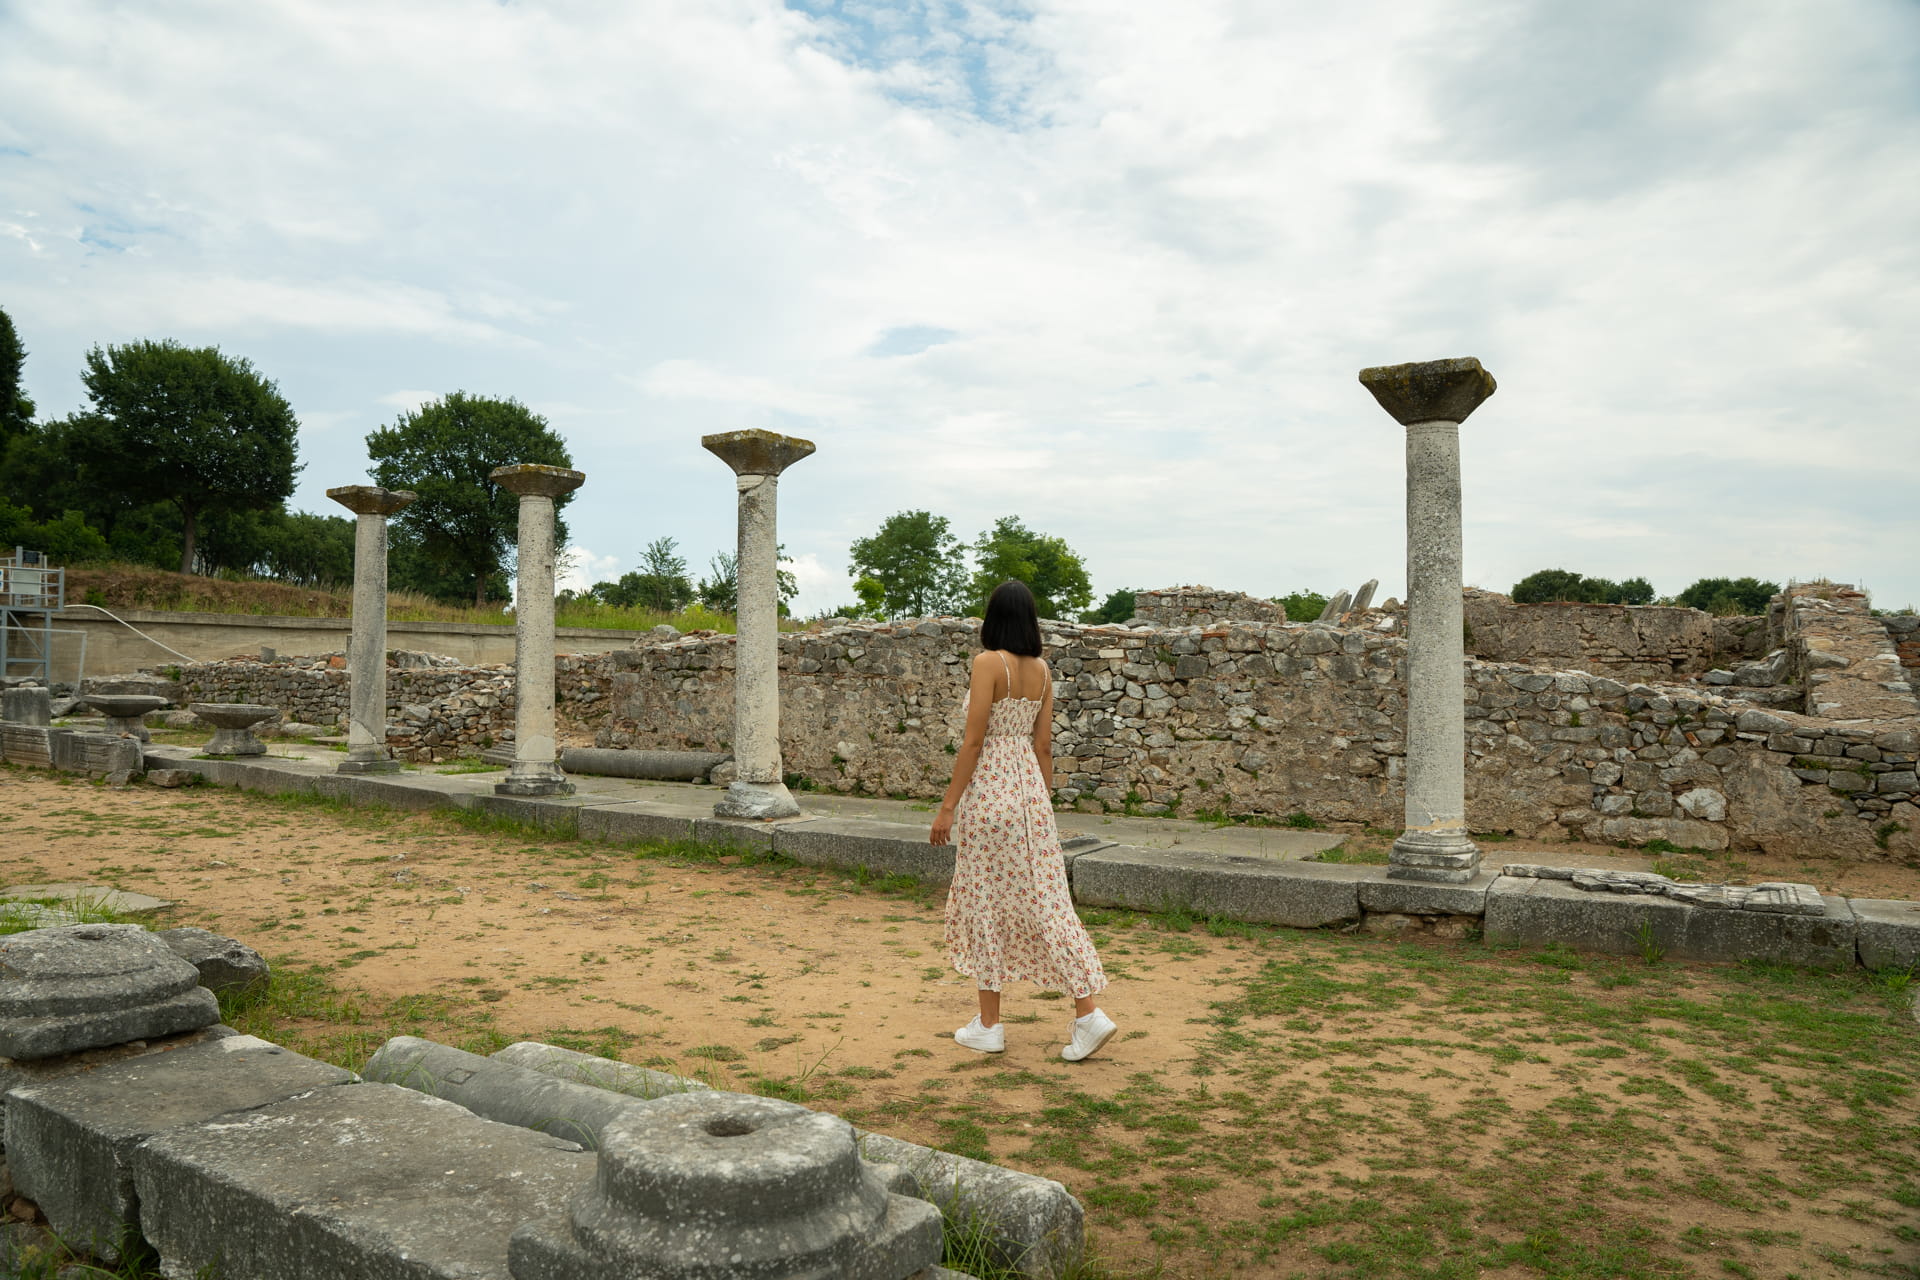 As you explore the archaeological site, you will appreciate the city’s transition from Hellenistic settlement to Roman colony 